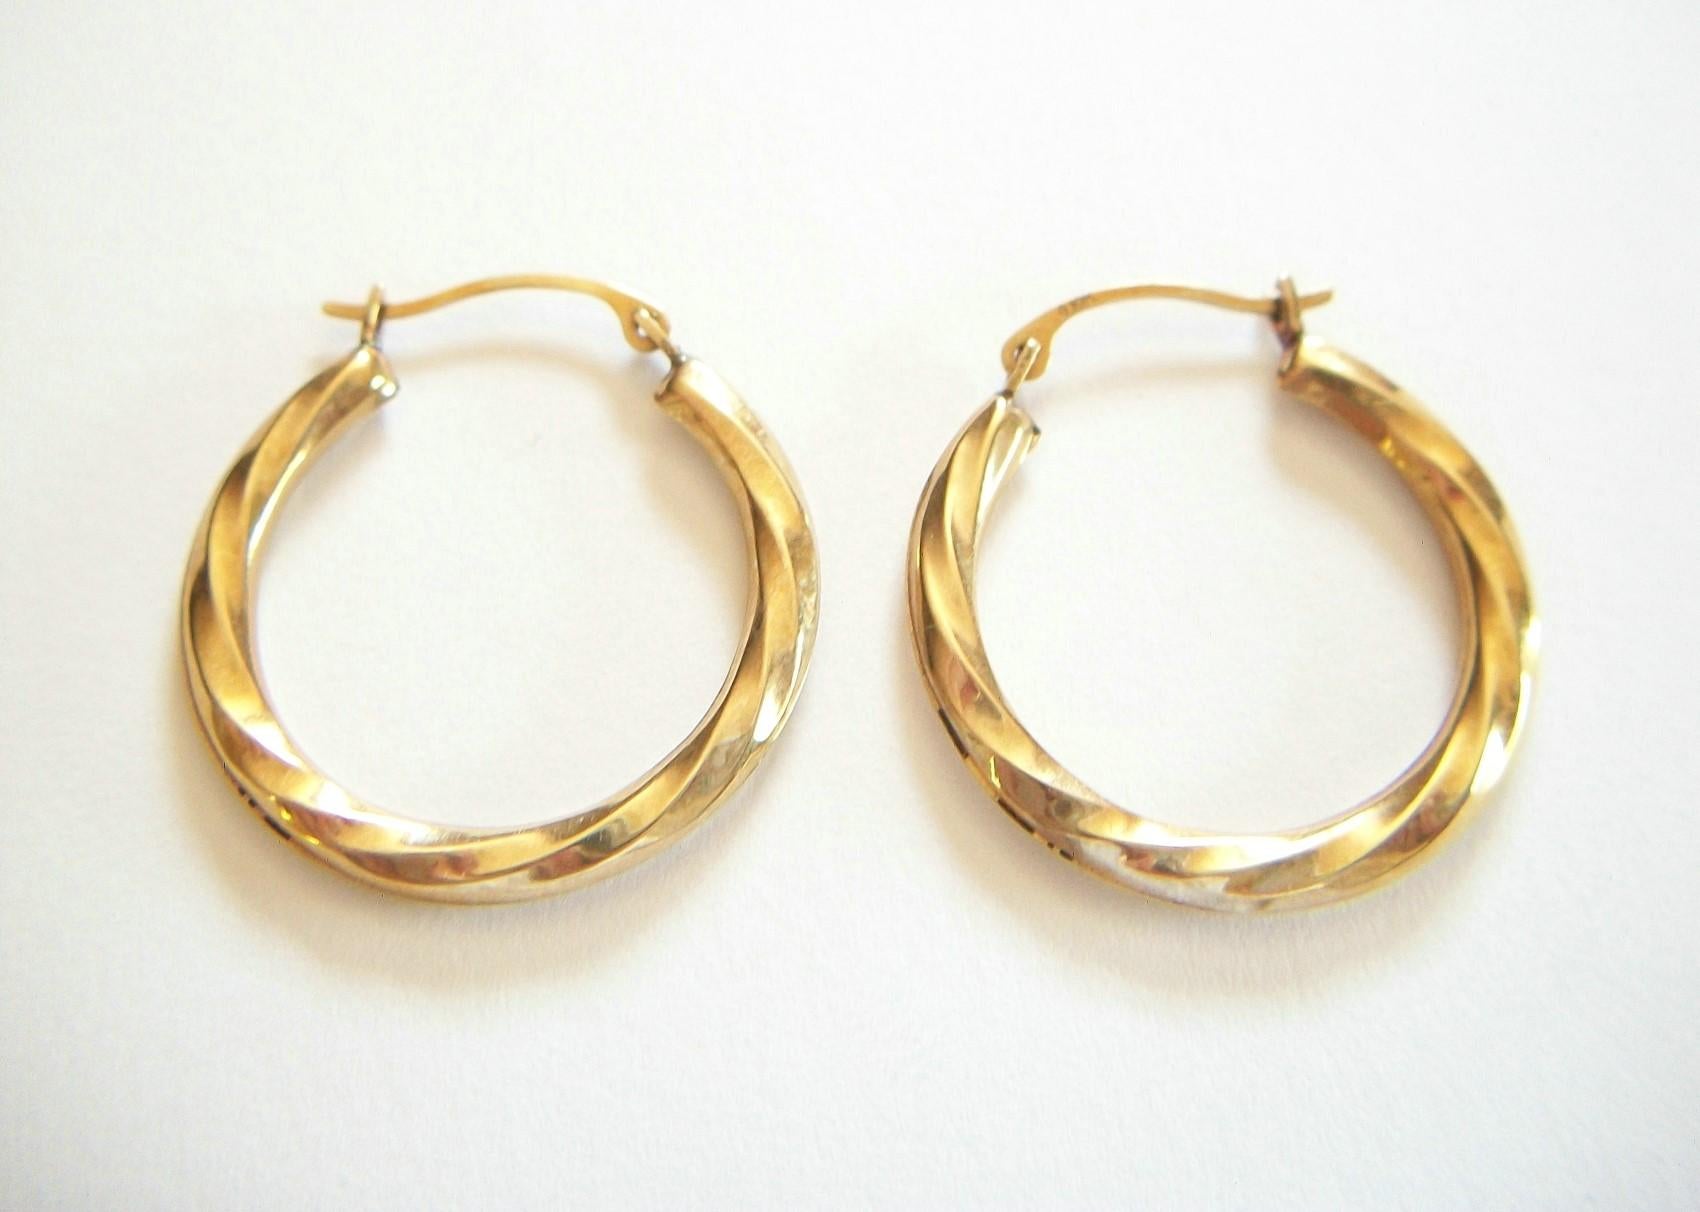 Vintage 10K yellow gold twisted hoop earrings - classic detail - light weight (hollow hoops) - snap closure - 10K hallmarks to each - maker's mark 'G' - United States - circa 1980's.

Excellent vintage condition - all original - no loss - no damage